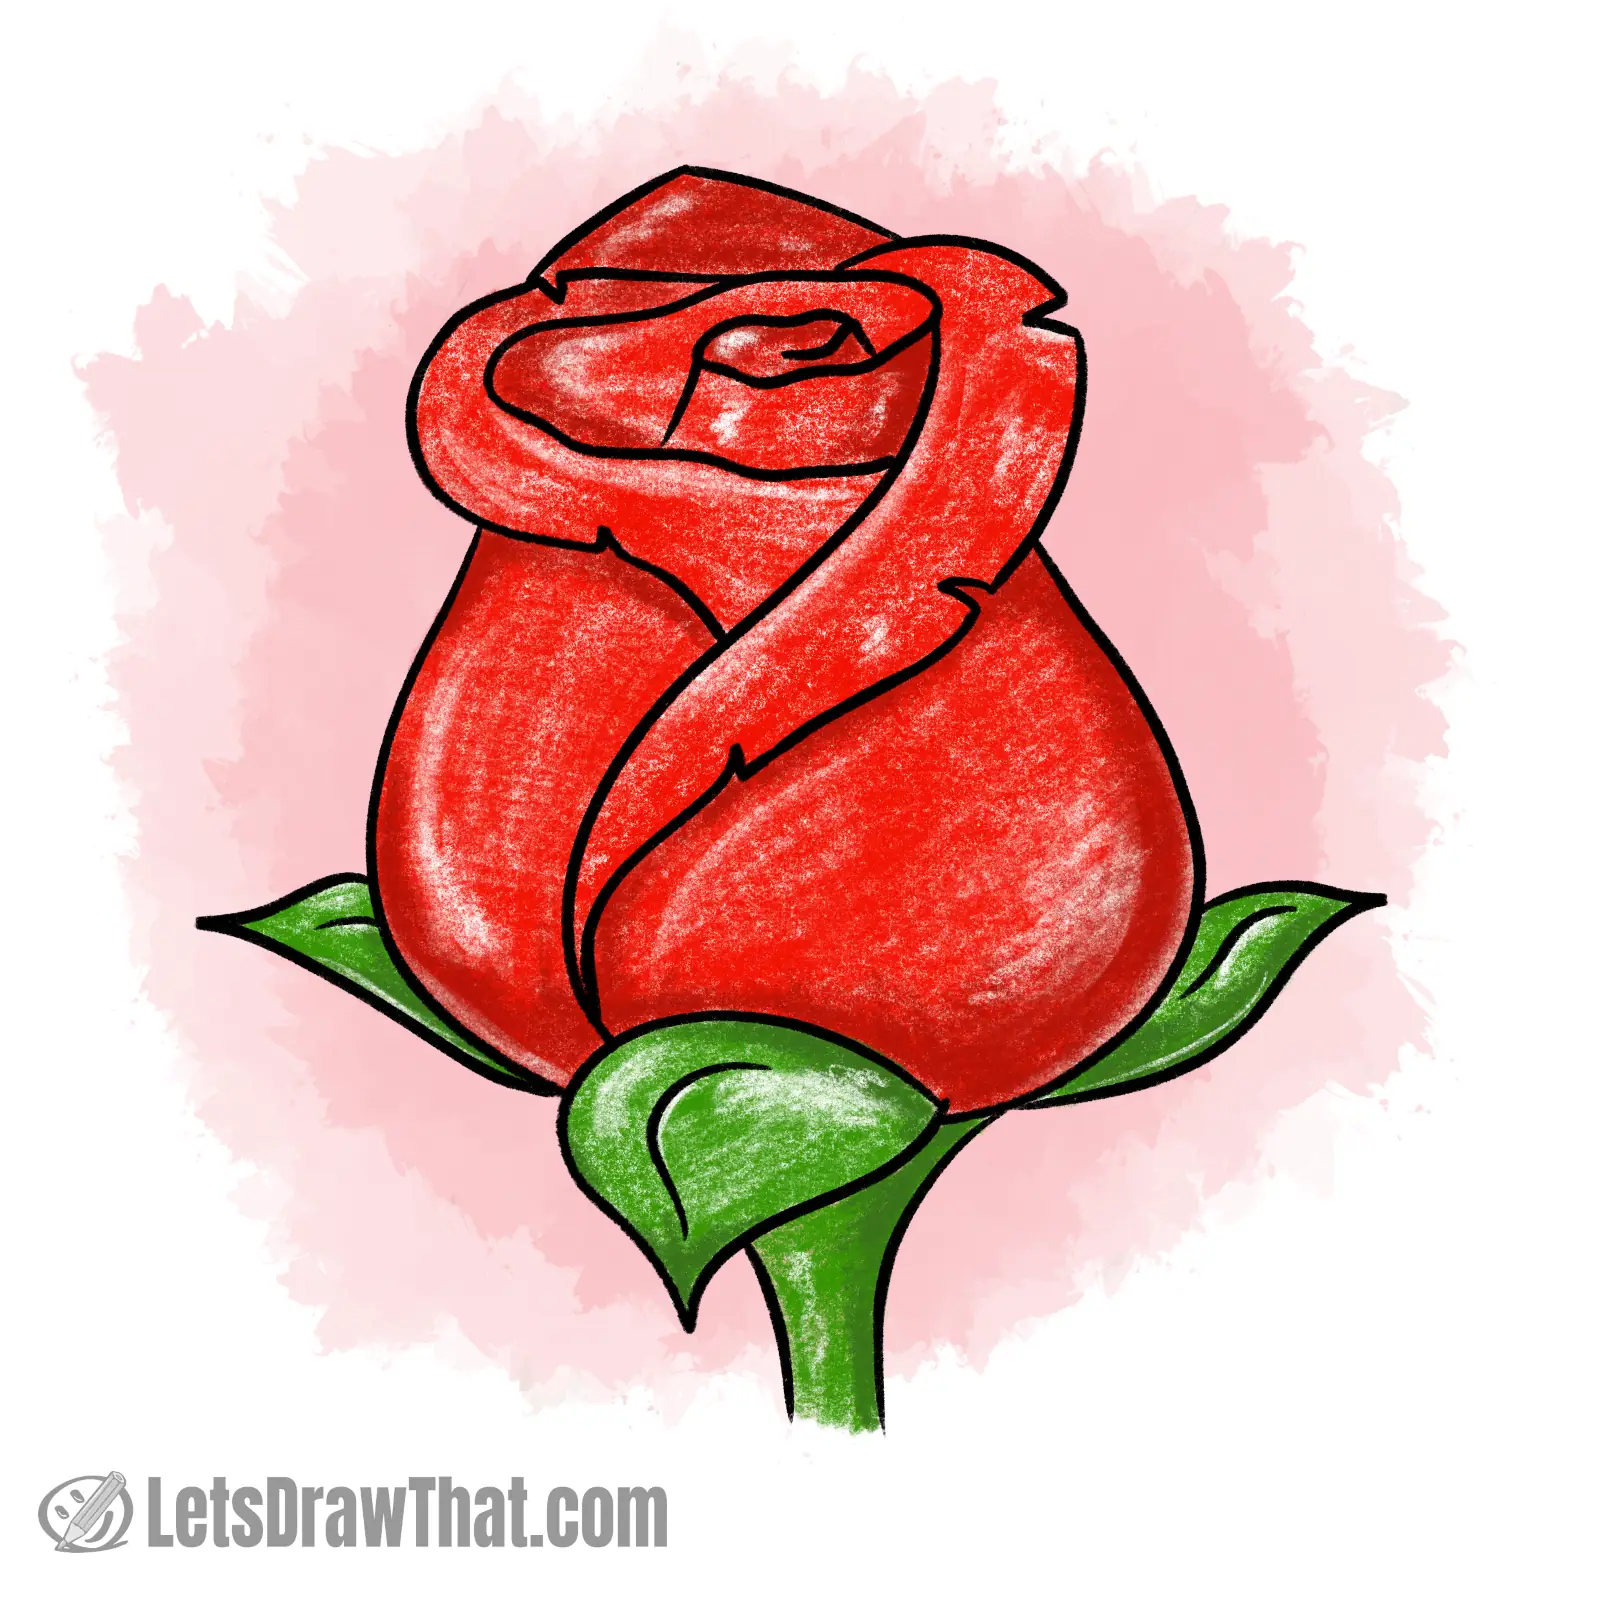 Learn How to Draw a Rose Easy Step-by-Step Video Tutorial-saigonsouth.com.vn